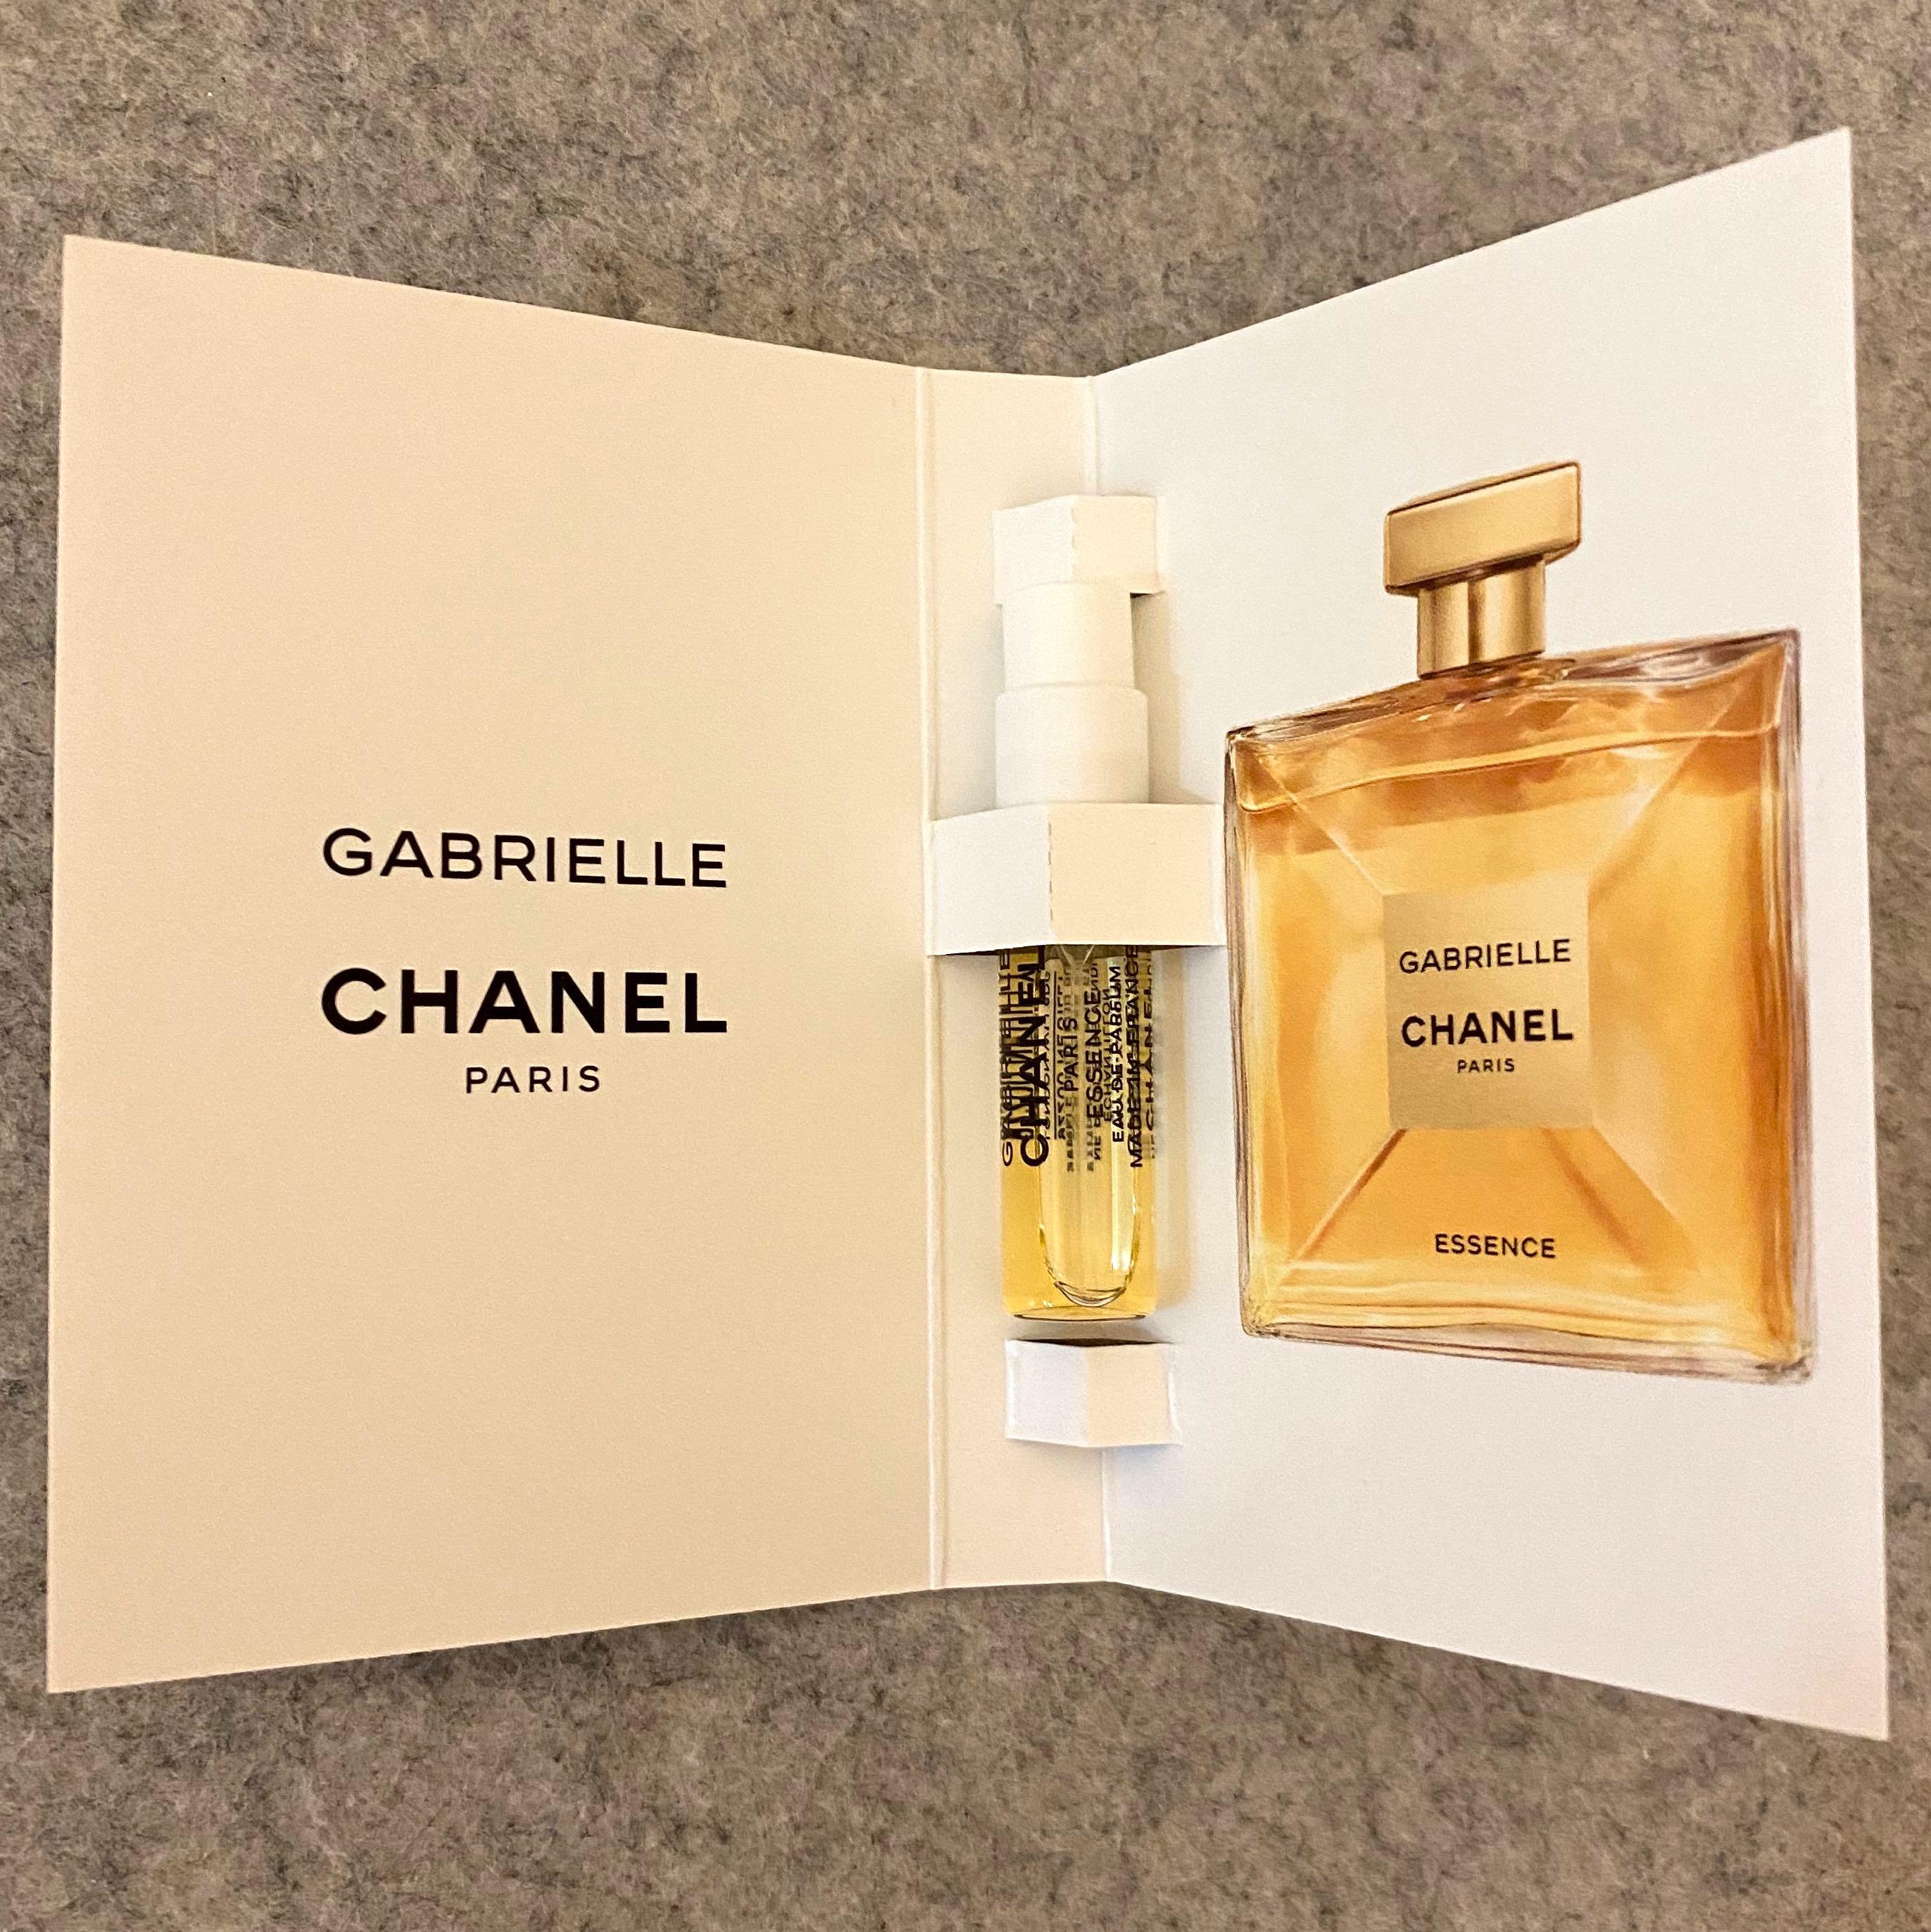 FREE POSTAGE Perfume Chanel gabrielle essence Perfume Tester for tester  Quality New in box Perfume PROMOTION DISCOUNT SALES PERFUME